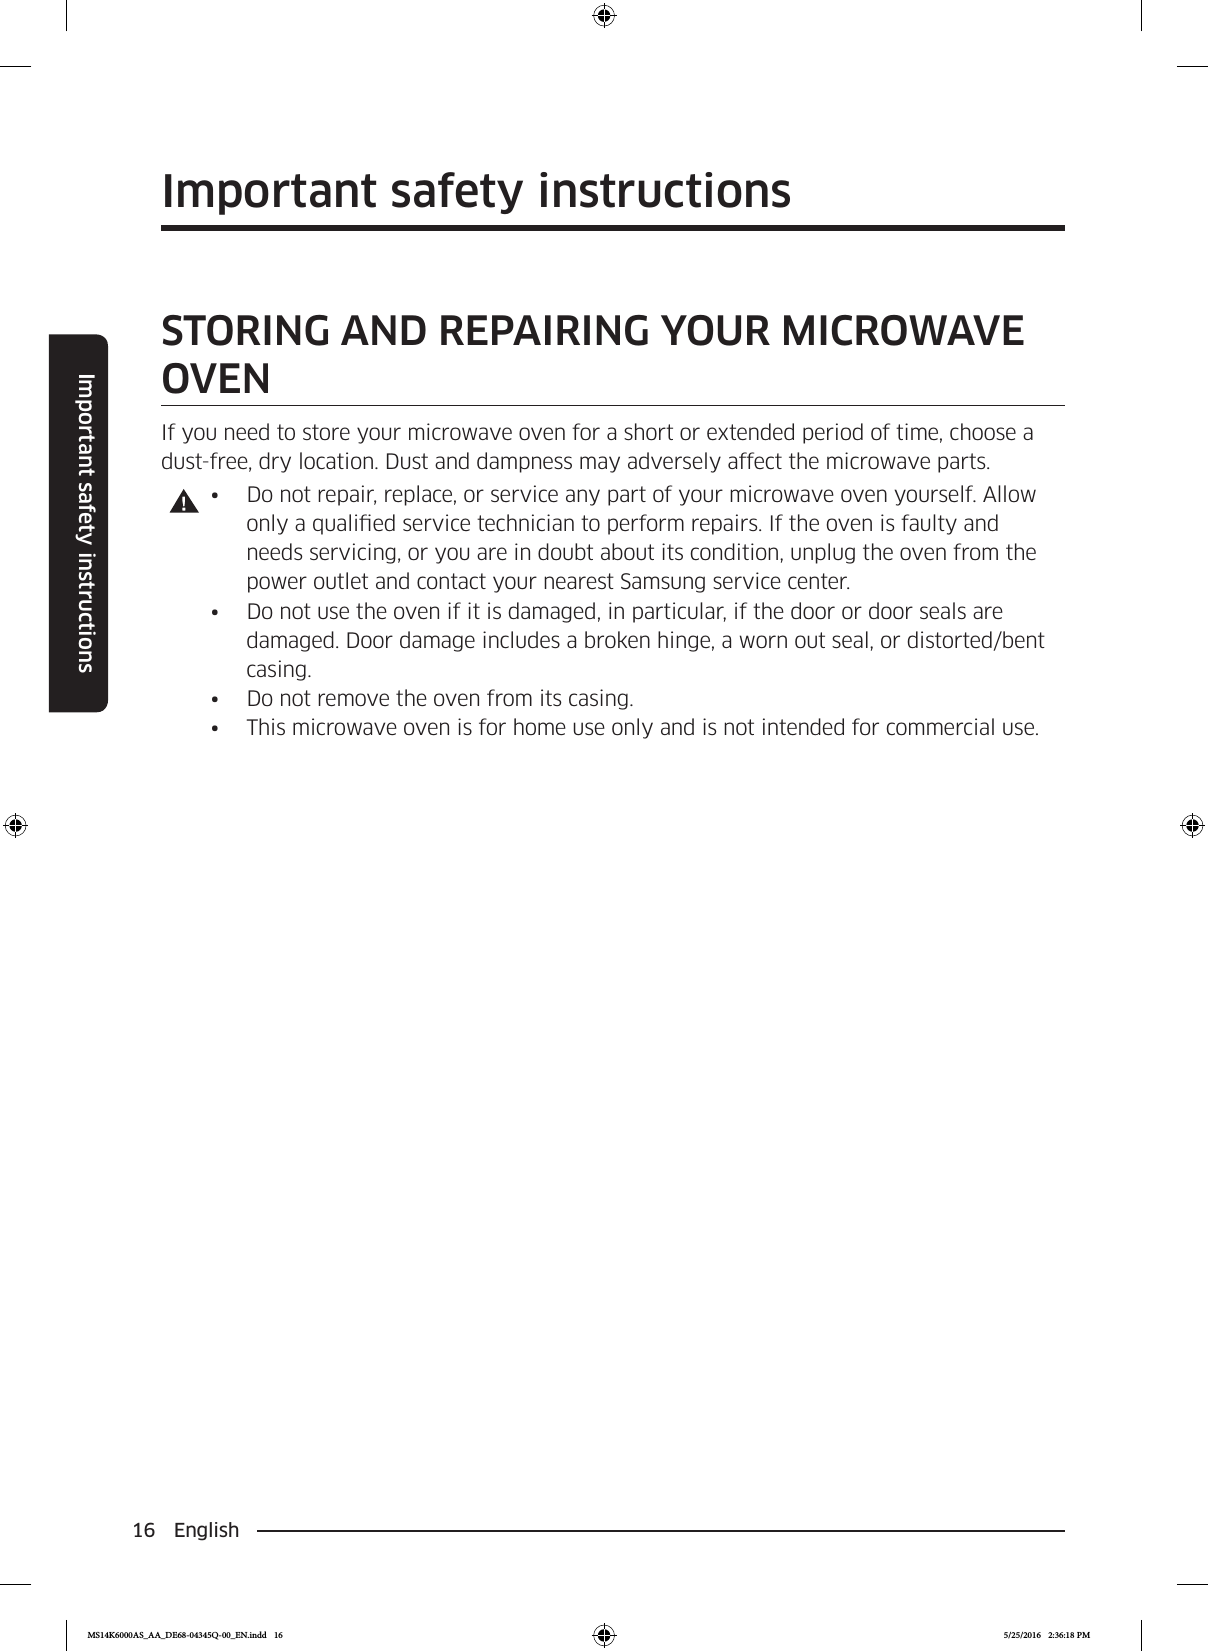 16 EnglishImportant safety instructionsSAVE THESE INSTRUCTIONSImportant safety instructionsSAVE THESE INSTRUCTIONSSTORING AND REPAIRING YOUR MICROWAVE OVENIf you need to store your microwave oven for a short or extended period of time, choose a dust-free, dry location. Dust and dampness may adversely affect the microwave parts.•  Do not repair, replace, or service any part of your microwave oven yourself. Allow only a qualied service technician to perform repairs. If the oven is faulty and needs servicing, or you are in doubt about its condition, unplug the oven from the power outlet and contact your nearest Samsung service center.•  Do not use the oven if it is damaged, in particular, if the door or door seals are damaged. Door damage includes a broken hinge, a worn out seal, or distorted/bent casing.•  Do not remove the oven from its casing.•  This microwave oven is for home use only and is not intended for commercial use.MS14K6000AS_AA_DE68-04345Q-00_EN.indd   16 5/25/2016   2:36:18 PM